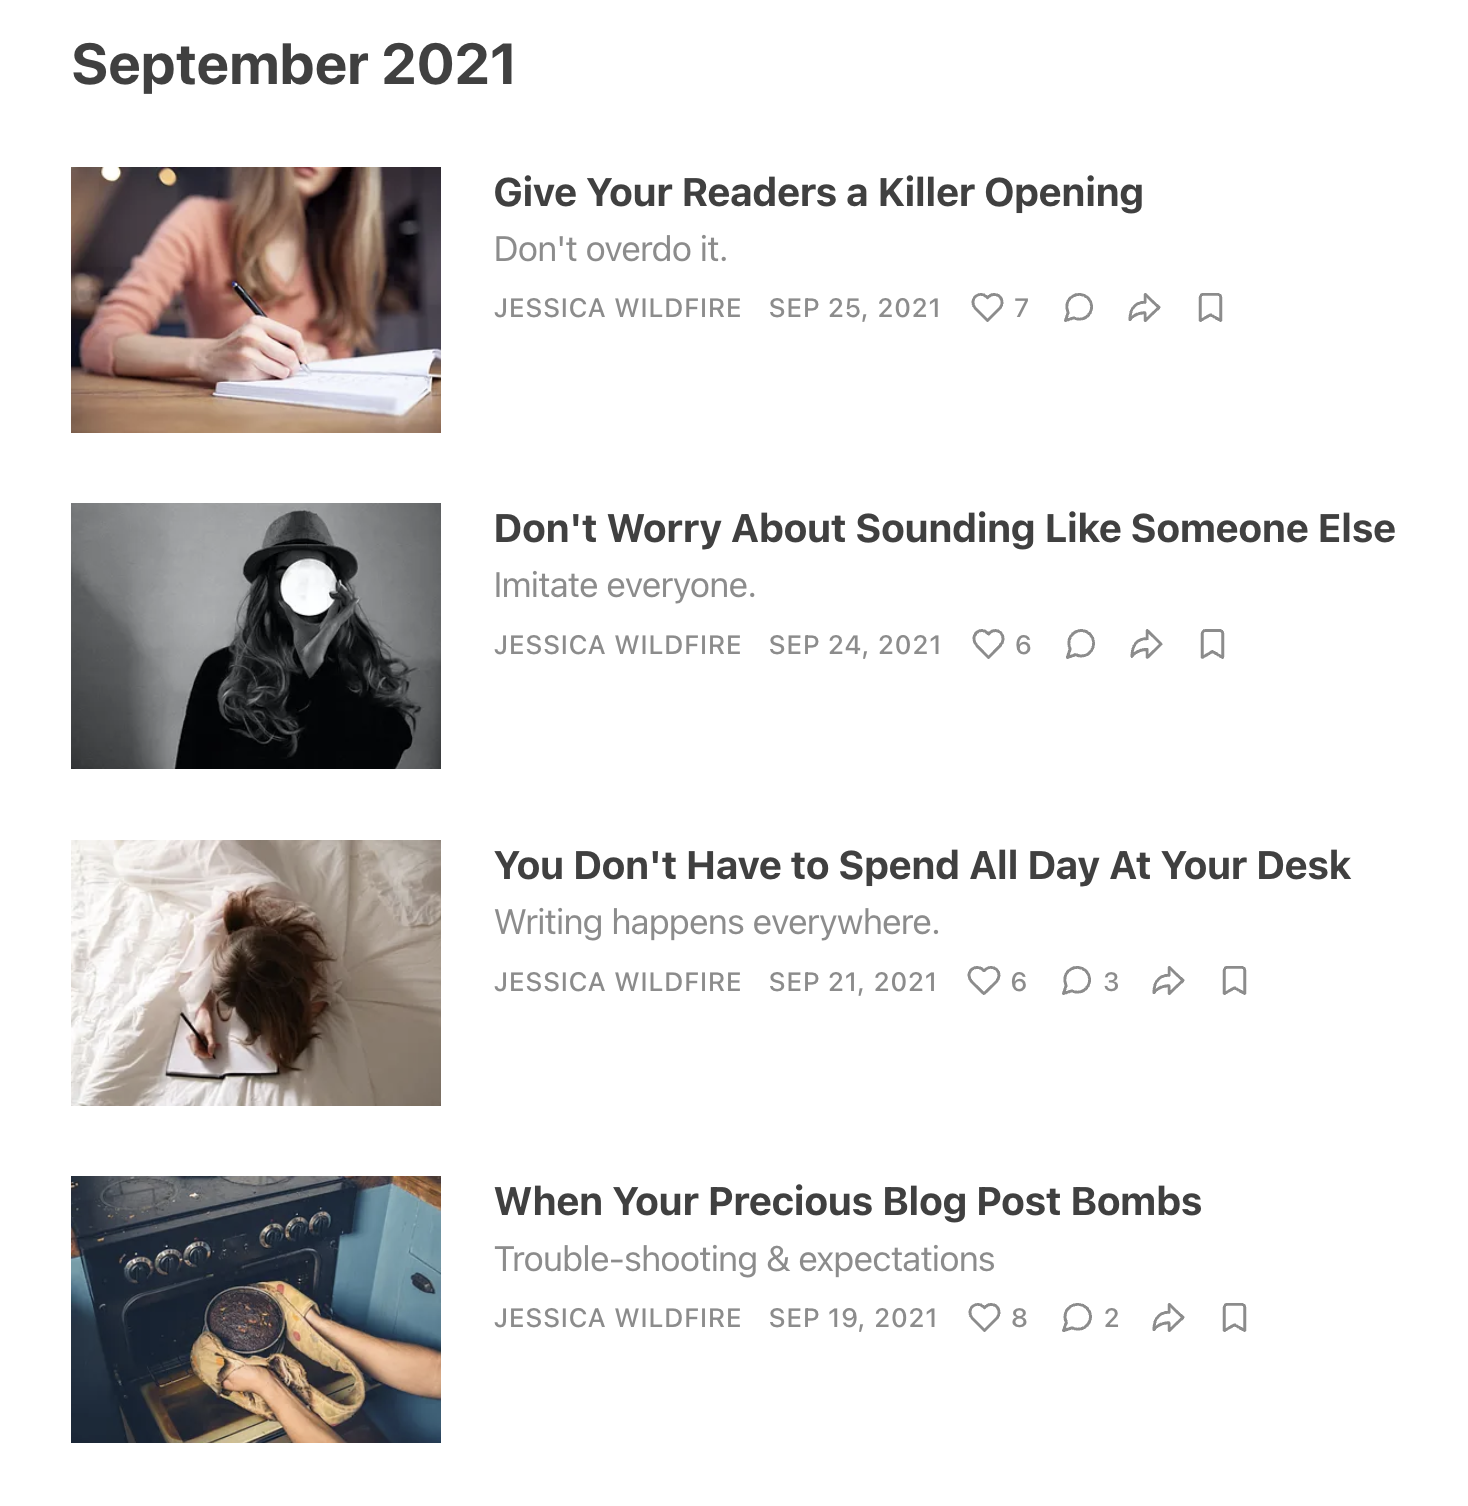 The image is a screenshot of a list of Jessica Wildfire headlines from September 2021, Give Your Readers a Killer Opening Sep 25, 2021 Don't Worry About Sounding Like Someone Else Imitate everyone. Sep 24, 2021 You Don't Have to Spend All Day At Your Desk Writing happens everywhere. Sep 21, 2021 When Your Precious Blog Post Bombs Sep 19, 2021